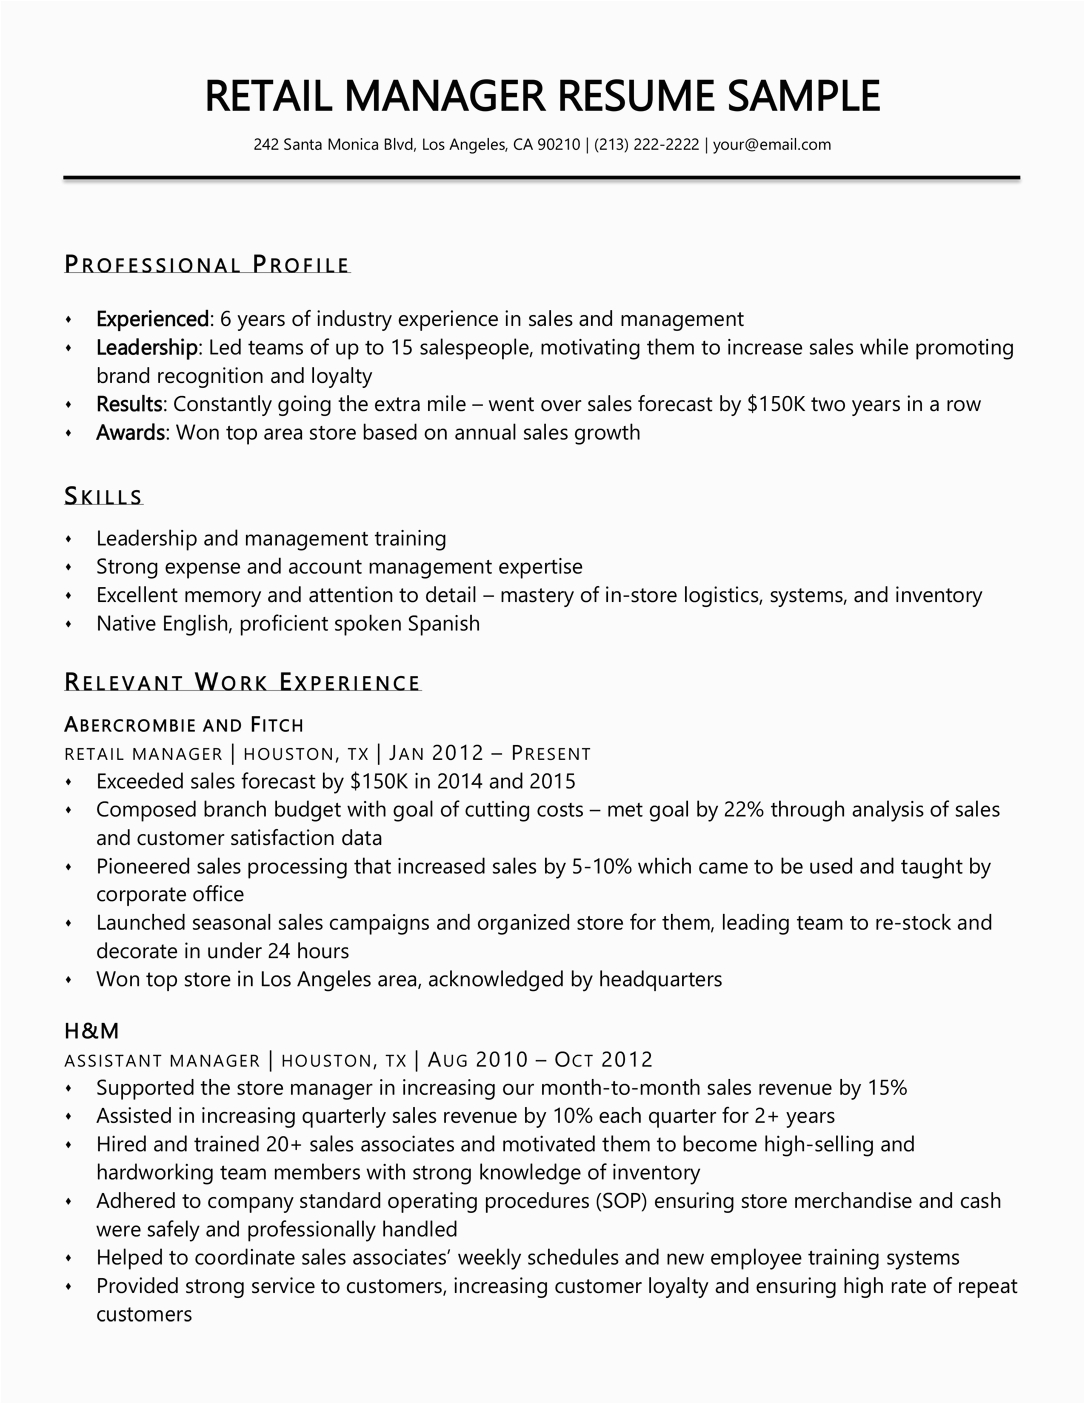 Resume Samples for Retail Management Position Retail Manager Resume Sample & Writing Tips